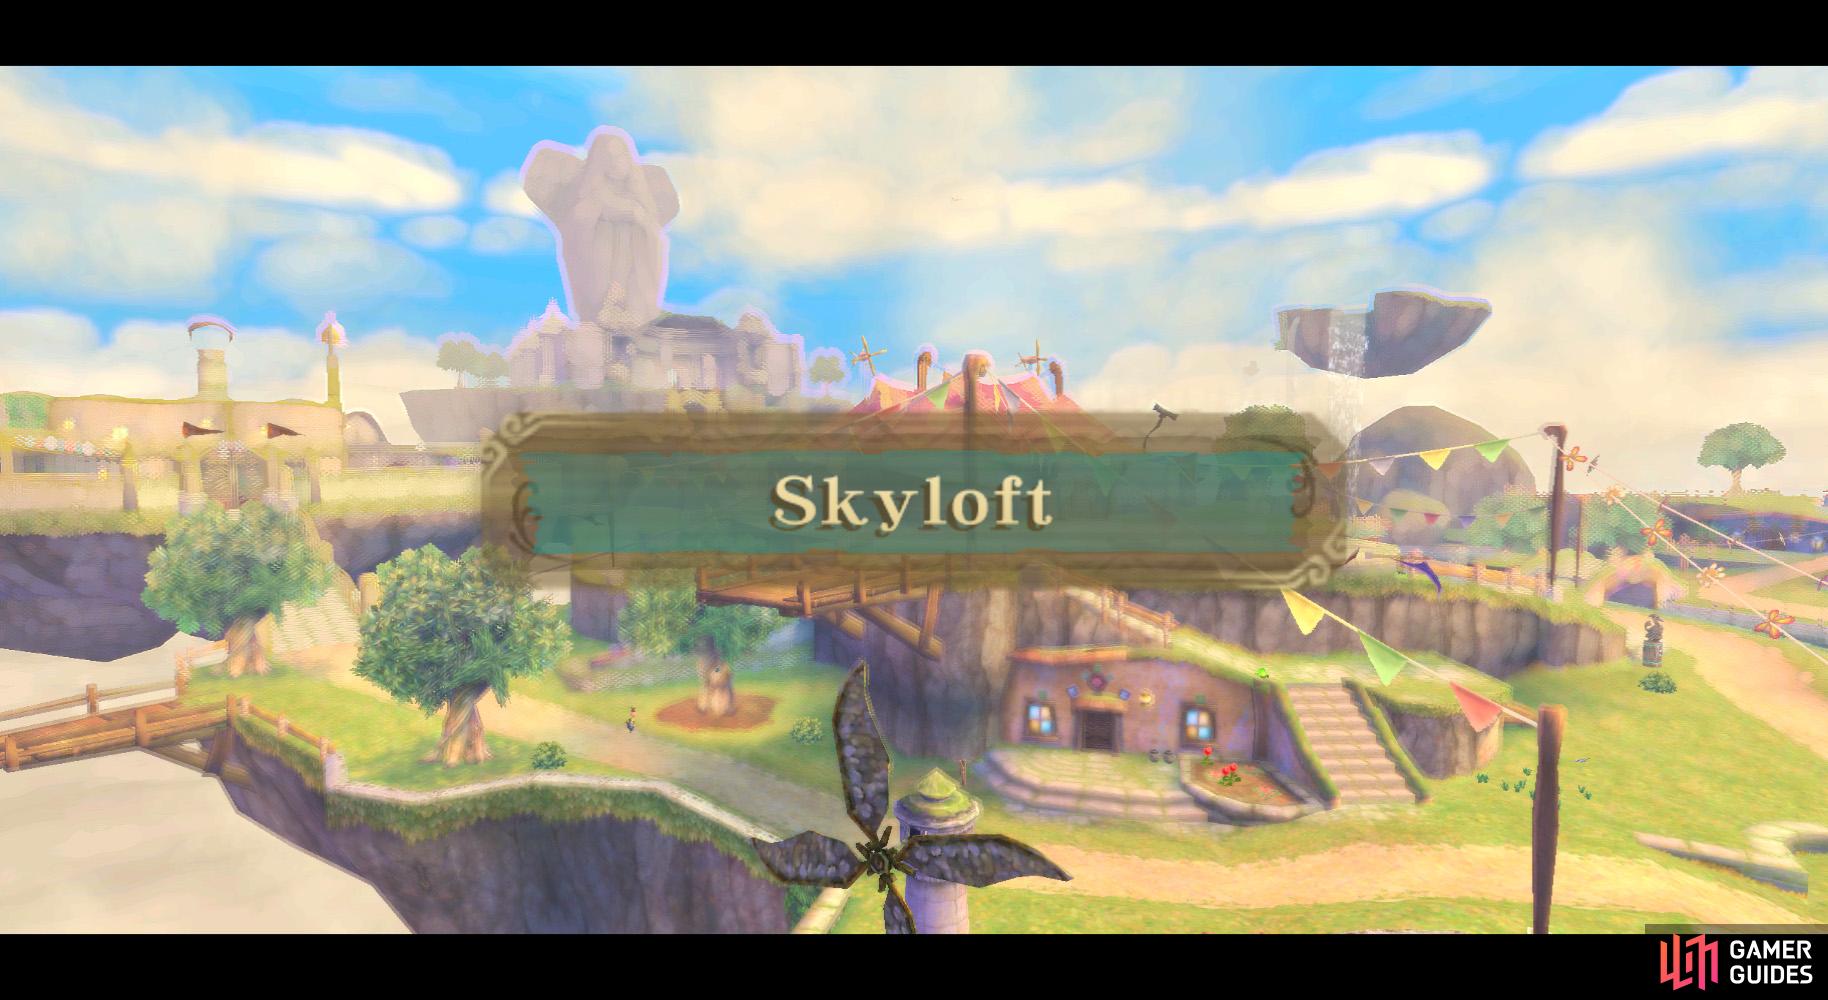 Skyloft is Link's home, a picturesque village in the sky.